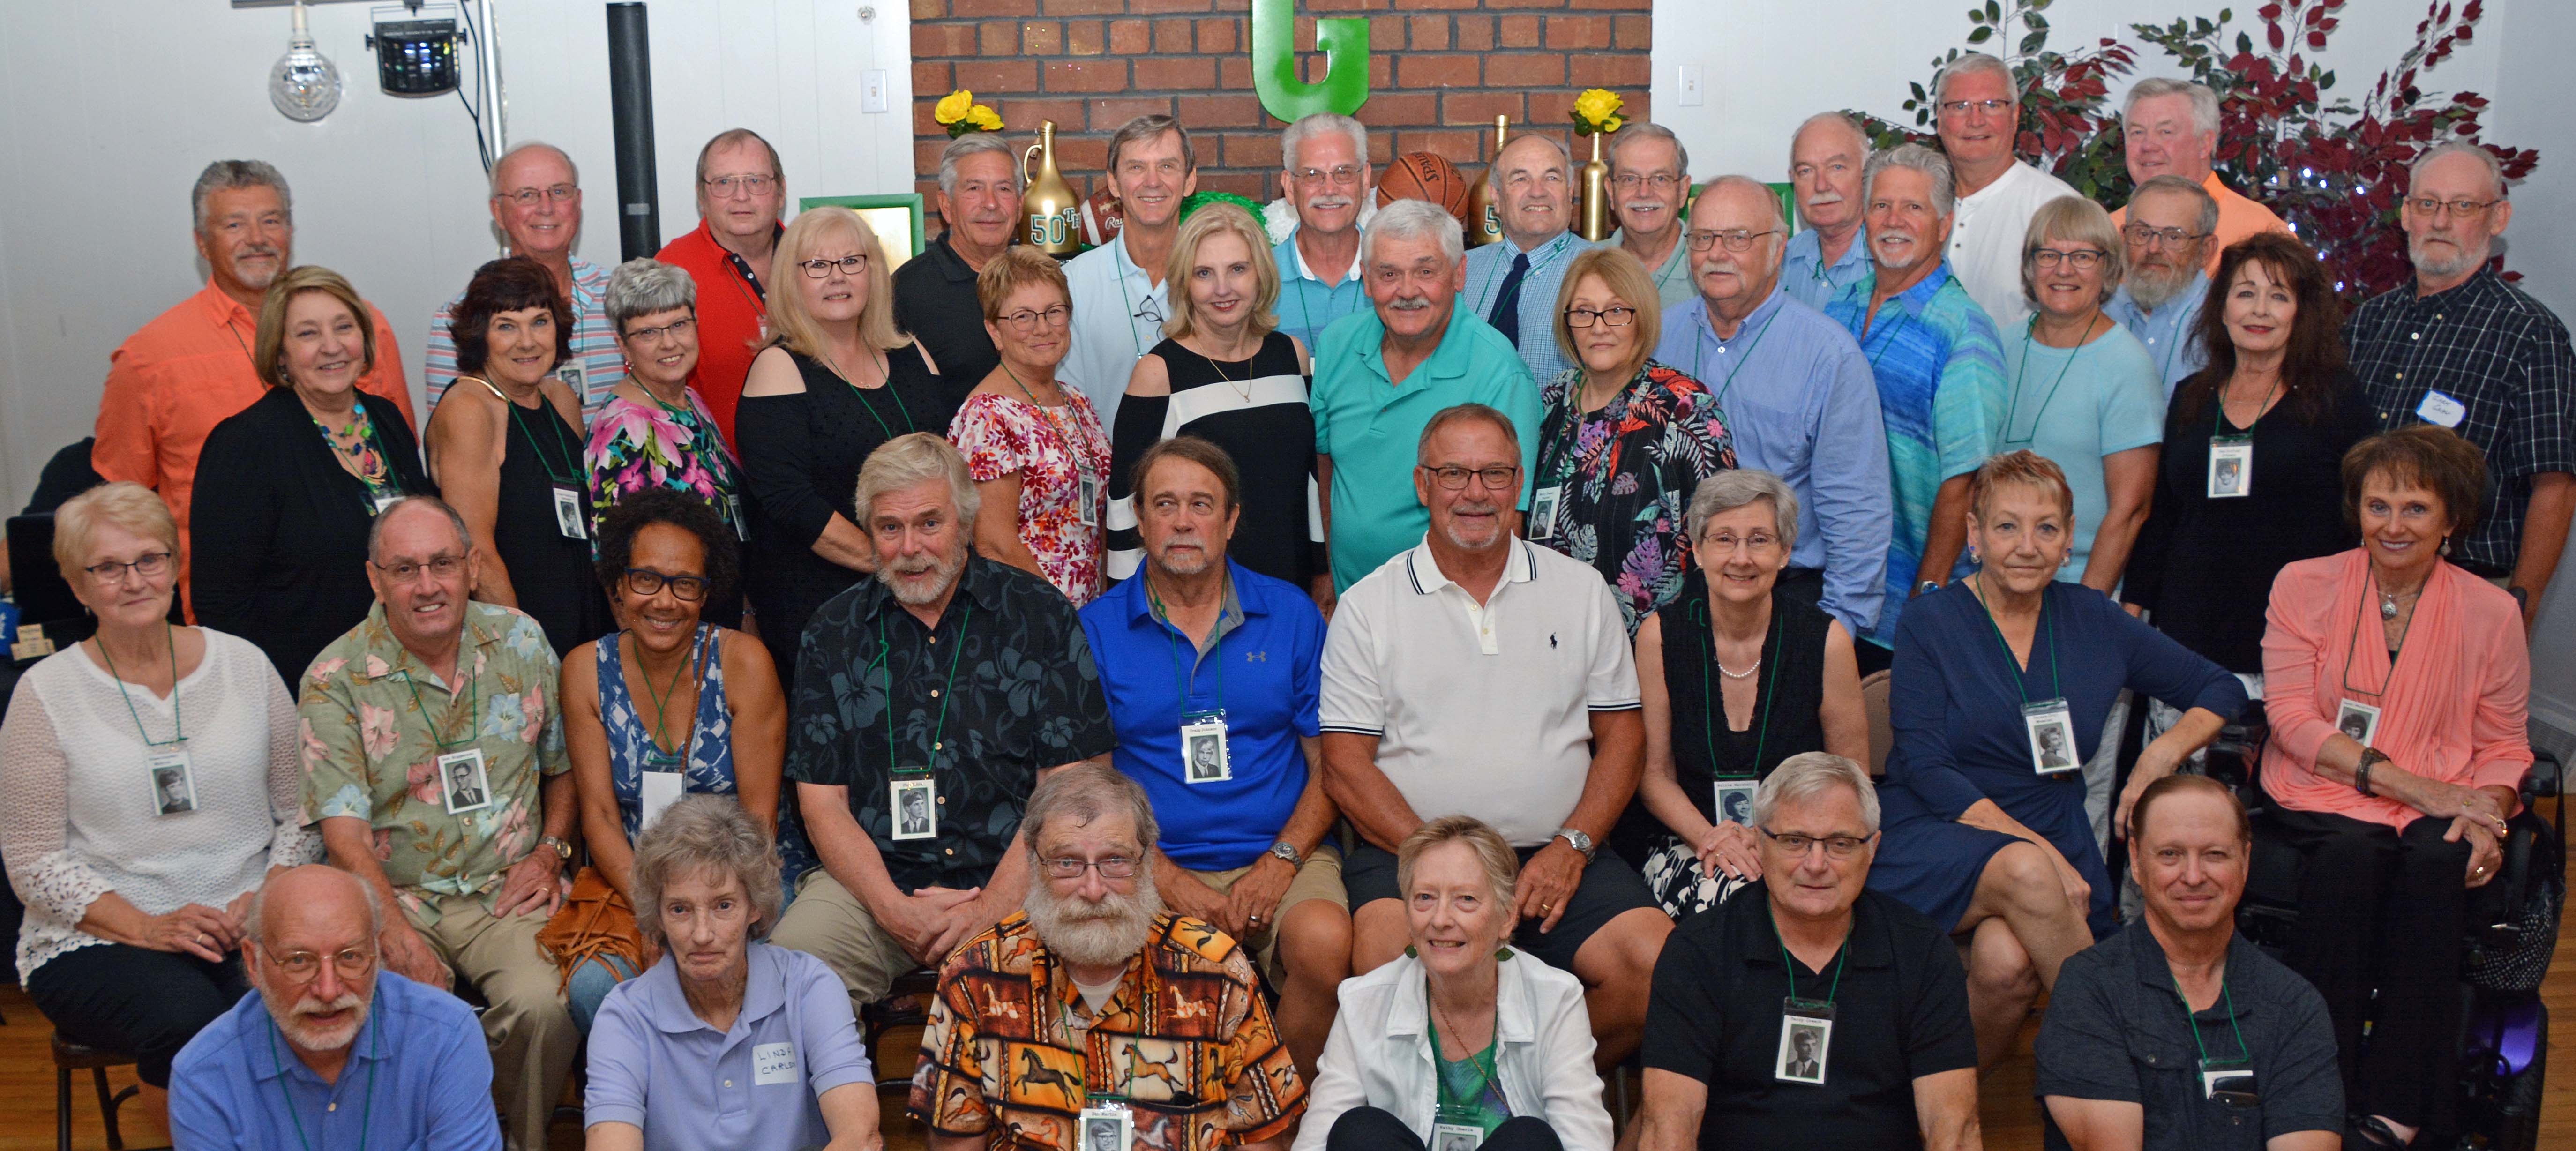 GHS Class of 68 50th Reunion